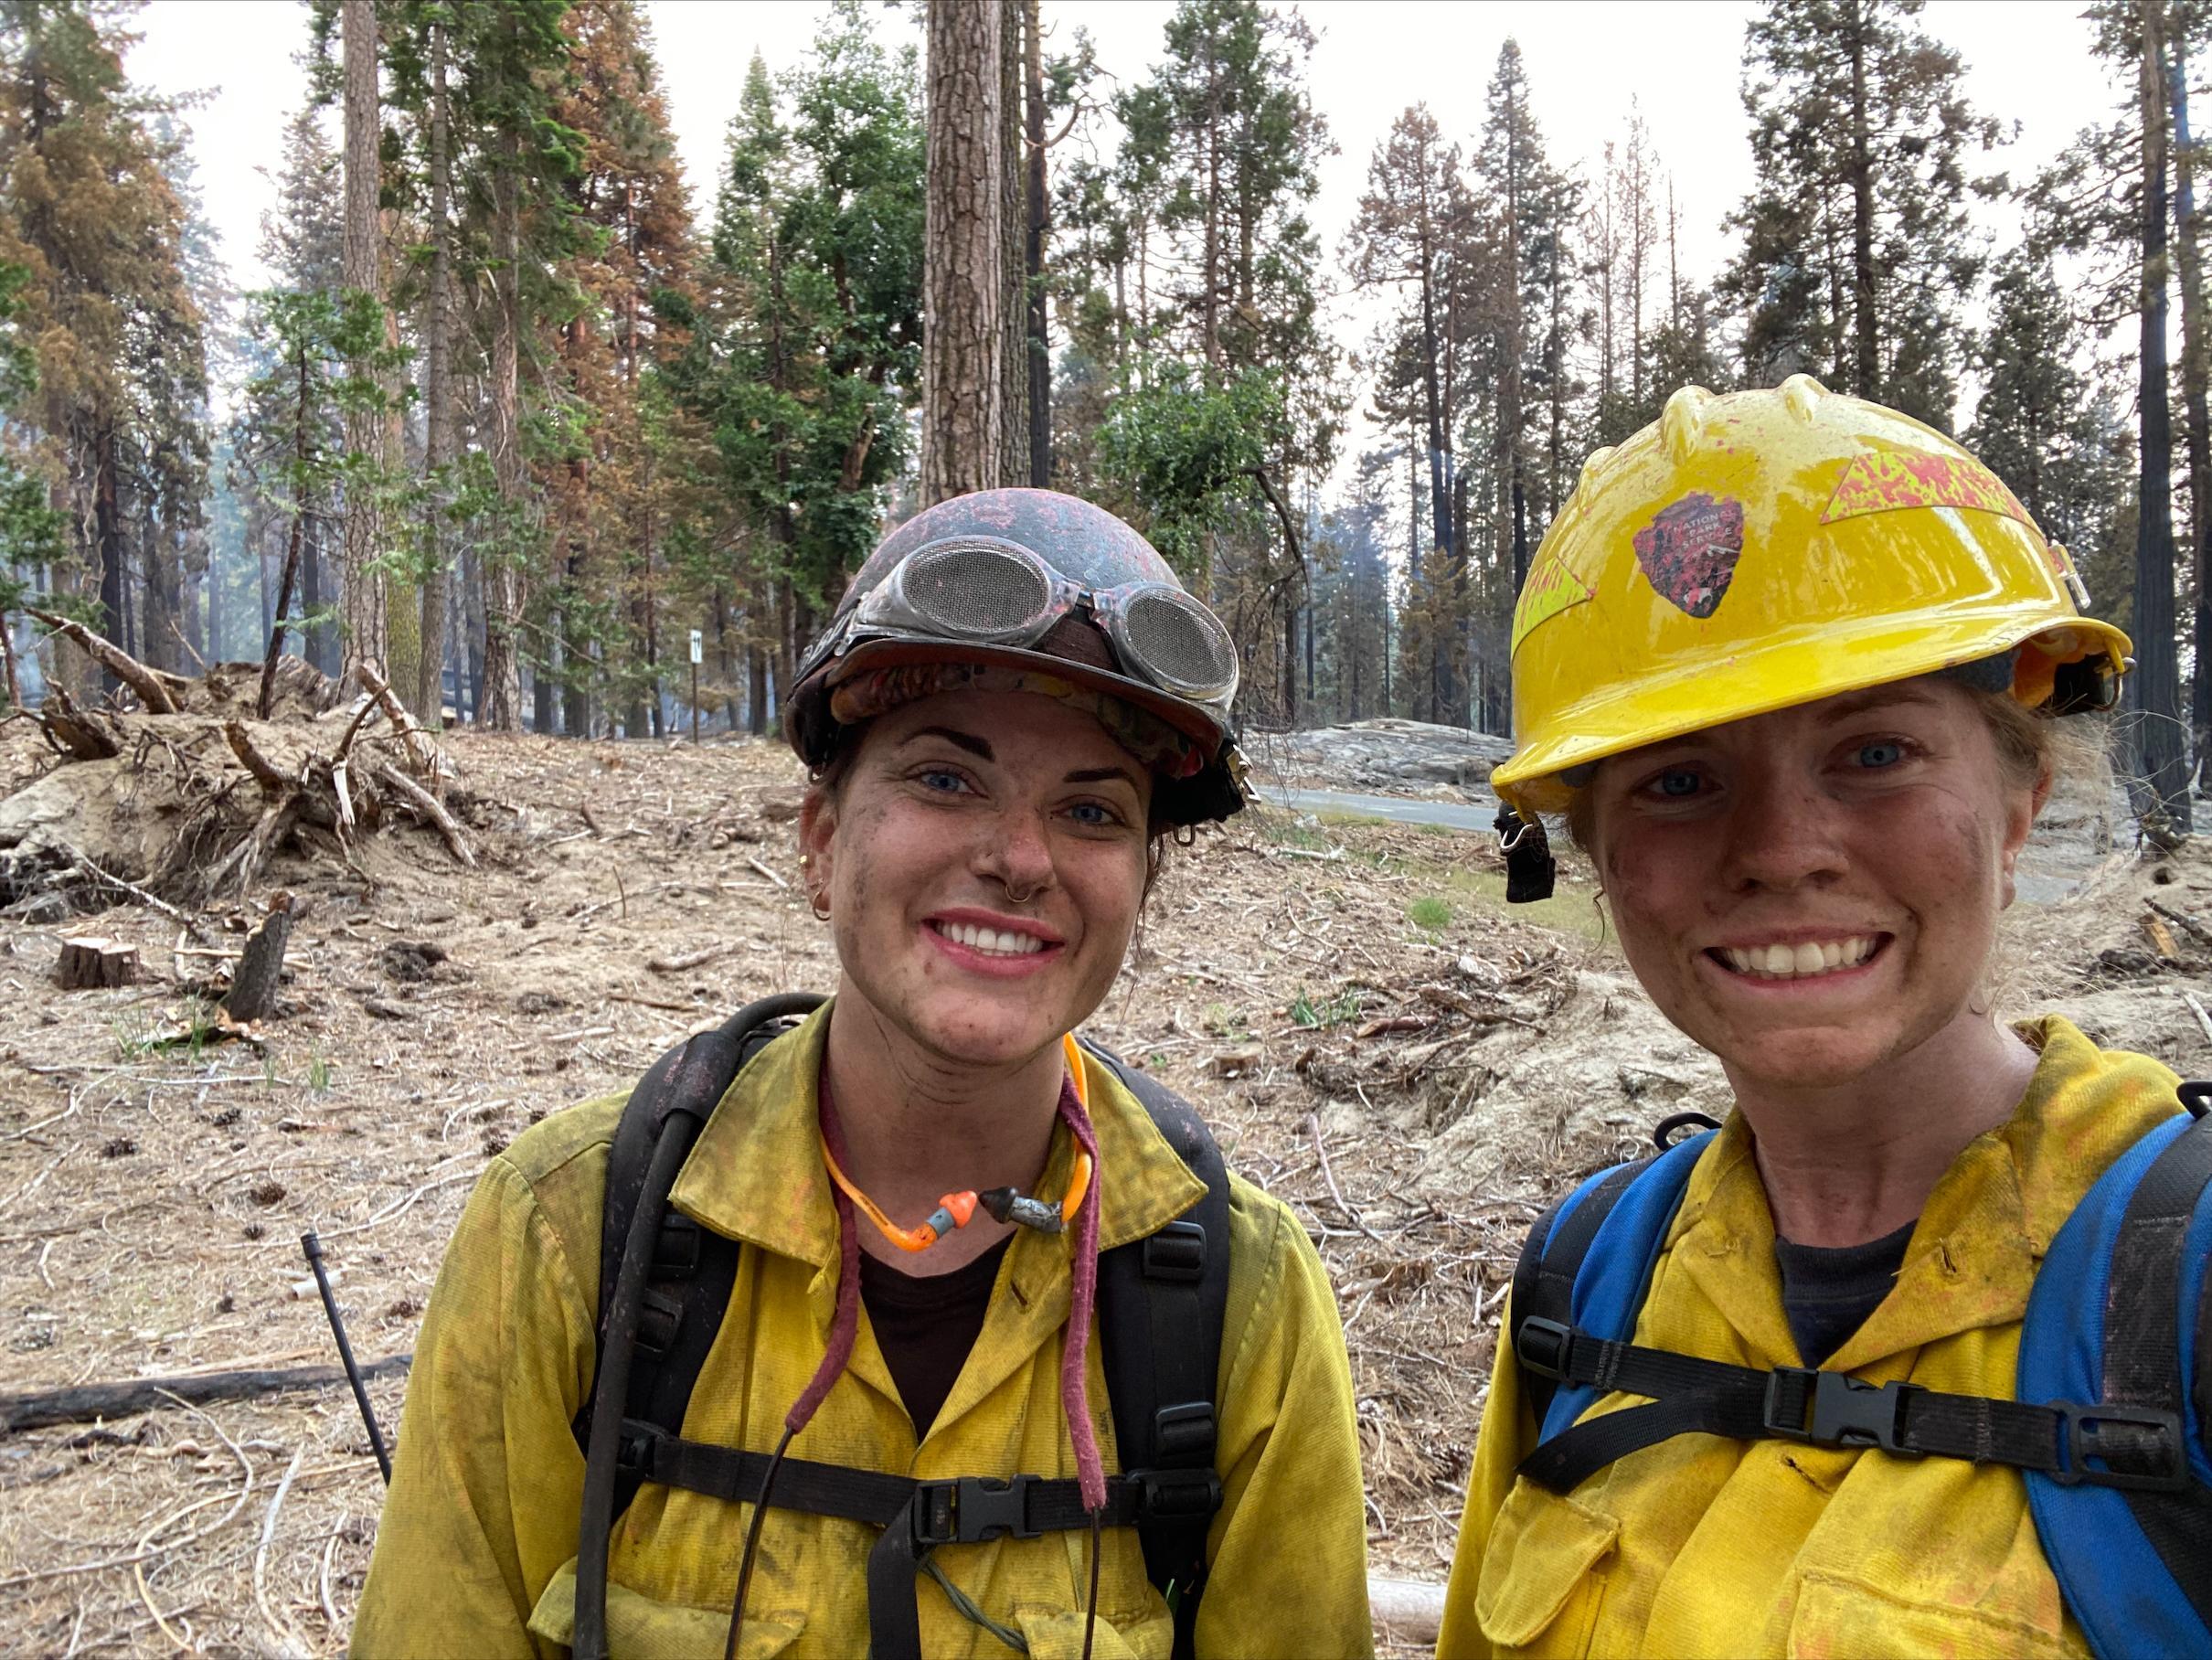 Rilee Nilsson and Sarah Platt from Yosemite National Parks Wildland Fire Module Crew 1 come off the line after initial attack of the Washburn Fire